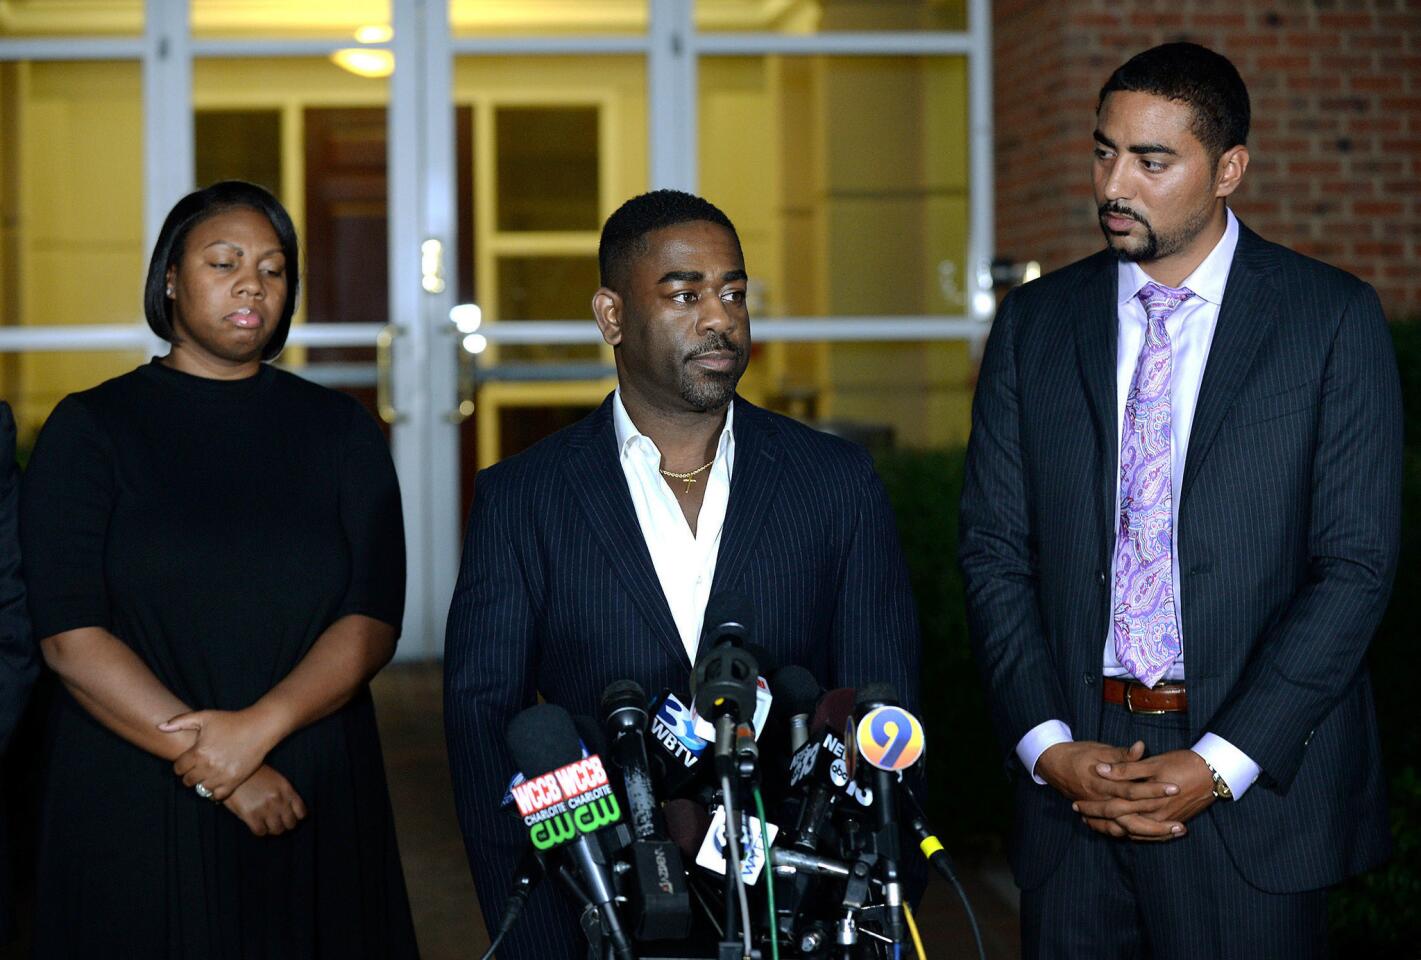 Rachel, left, and Ray Dotch, center, sister-in-law and brother-in-law to Keith Lamont Scott, give a news conference in Charlotte, N.C., on Saturday, Sept. 24, 2016. At right is the family's attorney, Justin Bamberg. Dotch objected to reporters' questions about Scott's background, saying he shouldn't have to "humanize in order for him to be treated fairly."